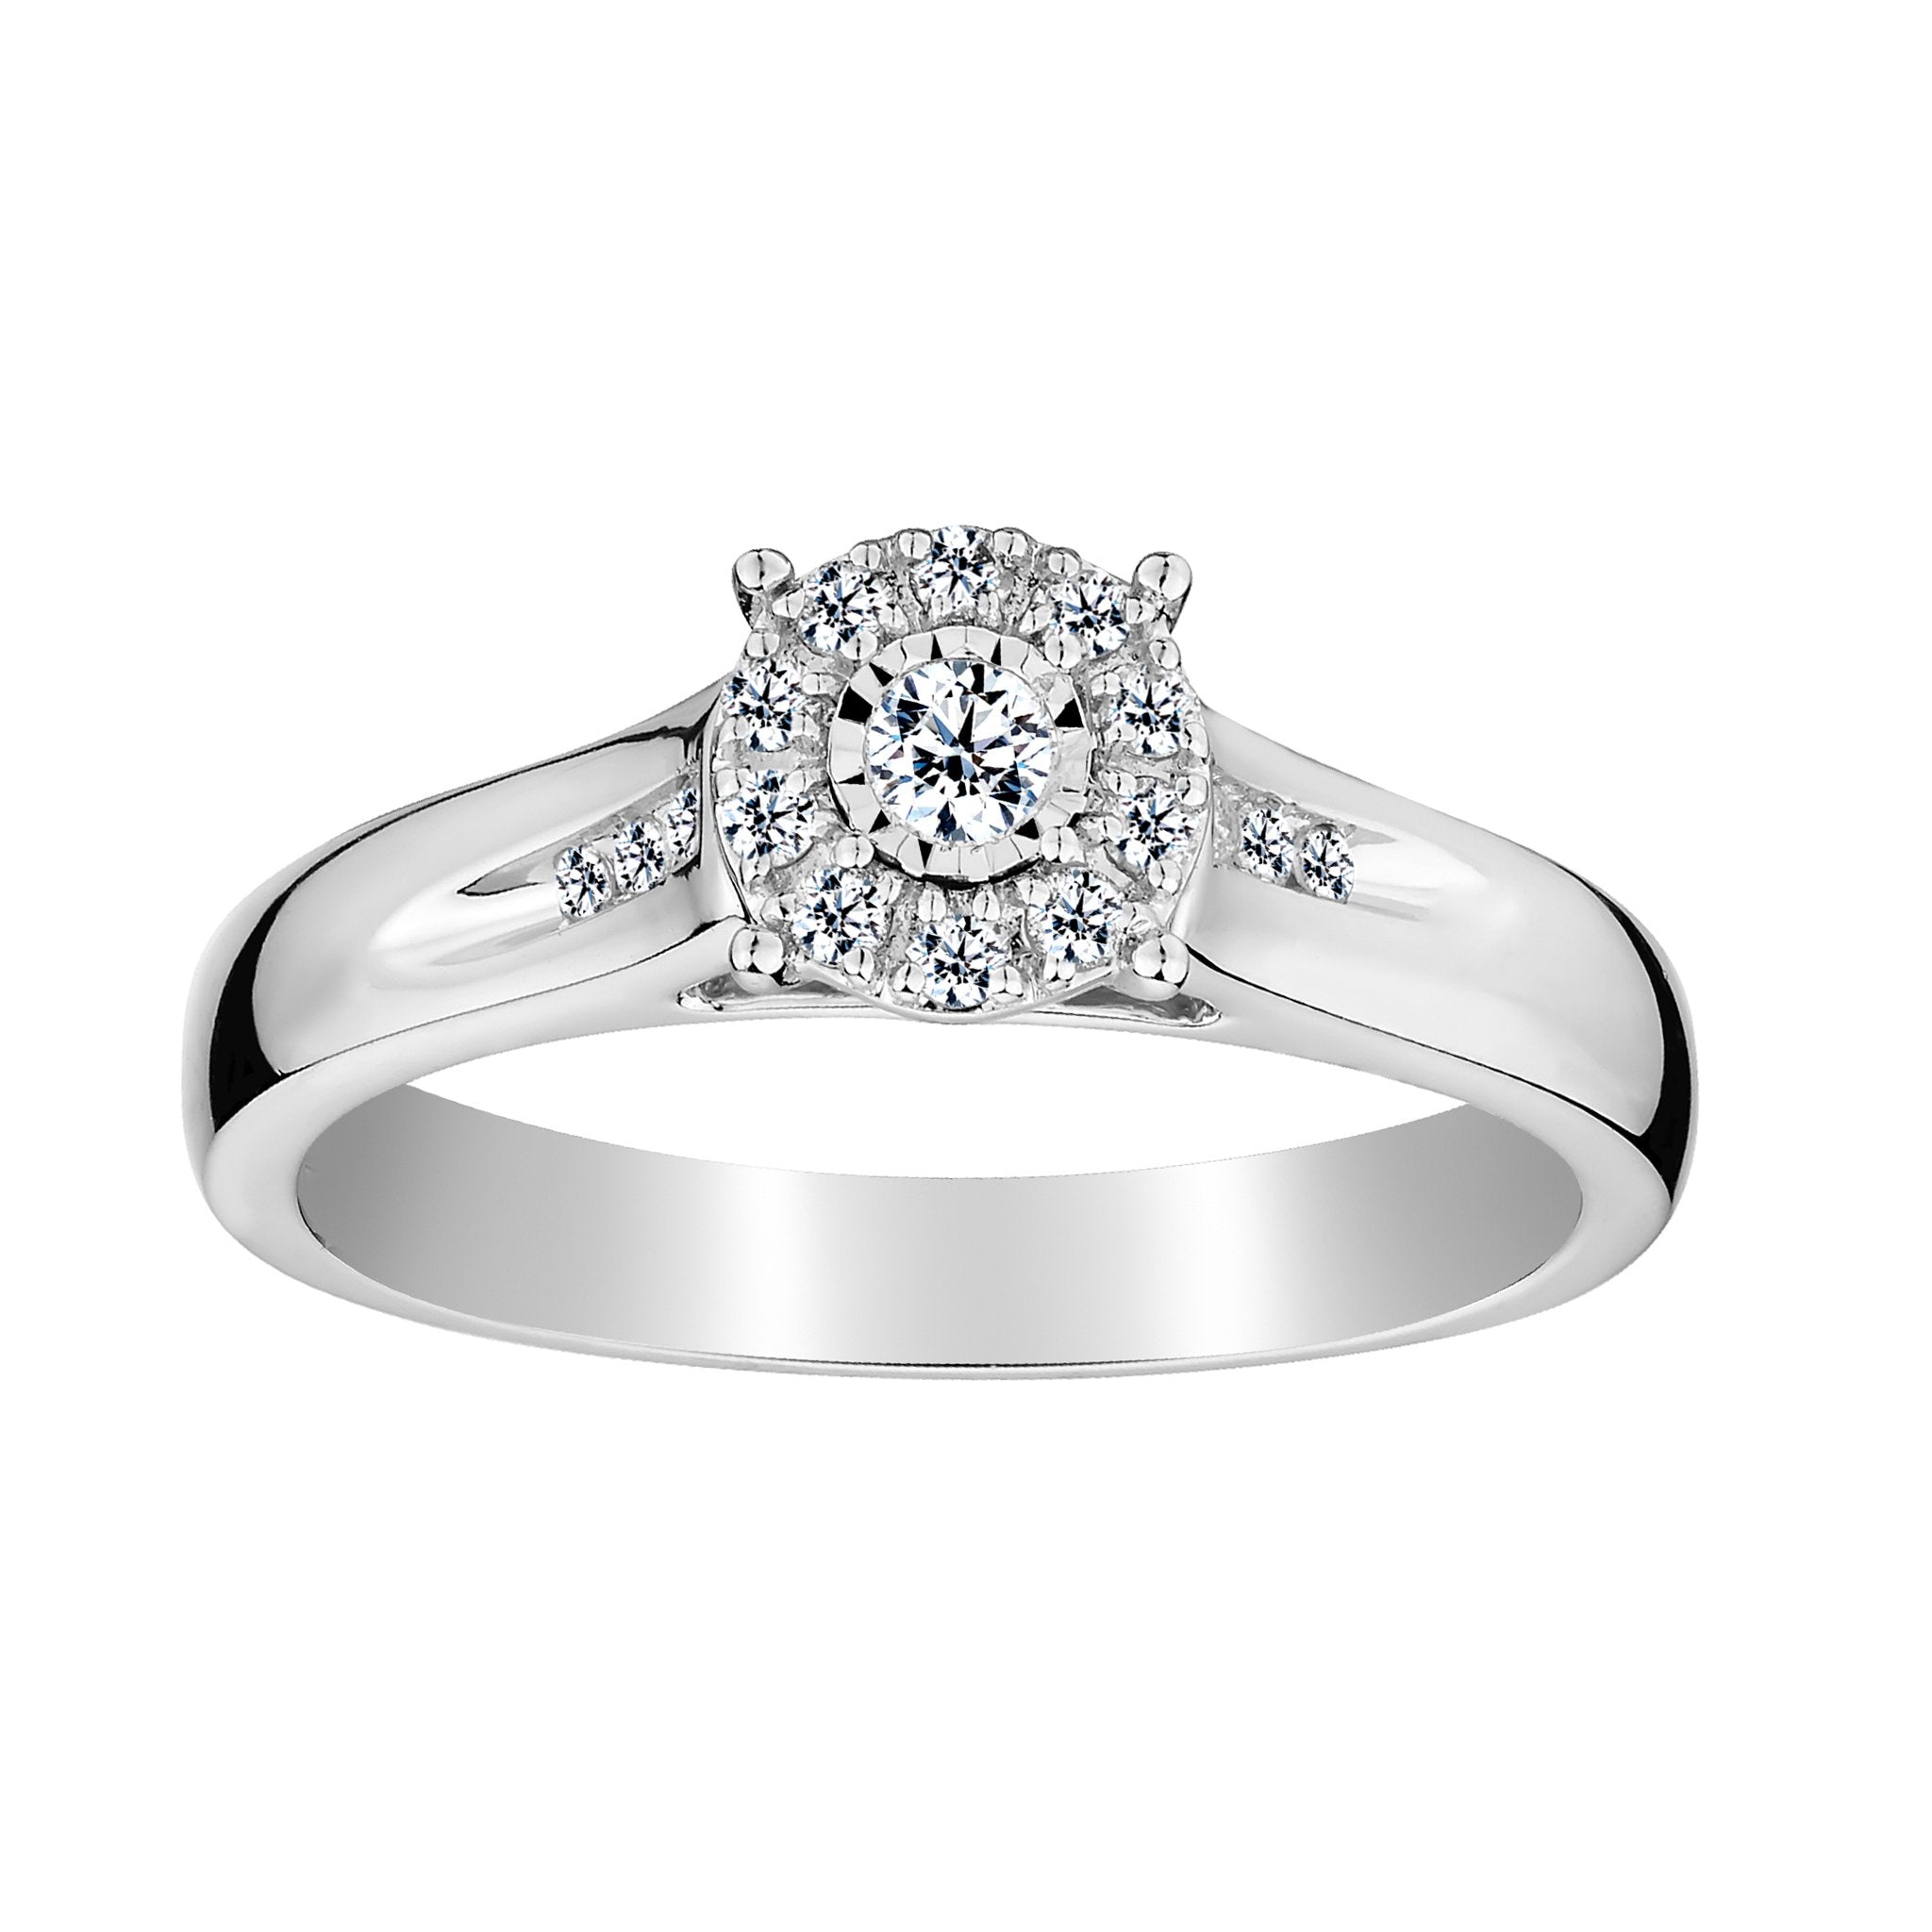 .20 CARAT DIAMOND "MIRACLE" HALO RING, 10kt WHITE GOLD - Griffin Jewellery Designs